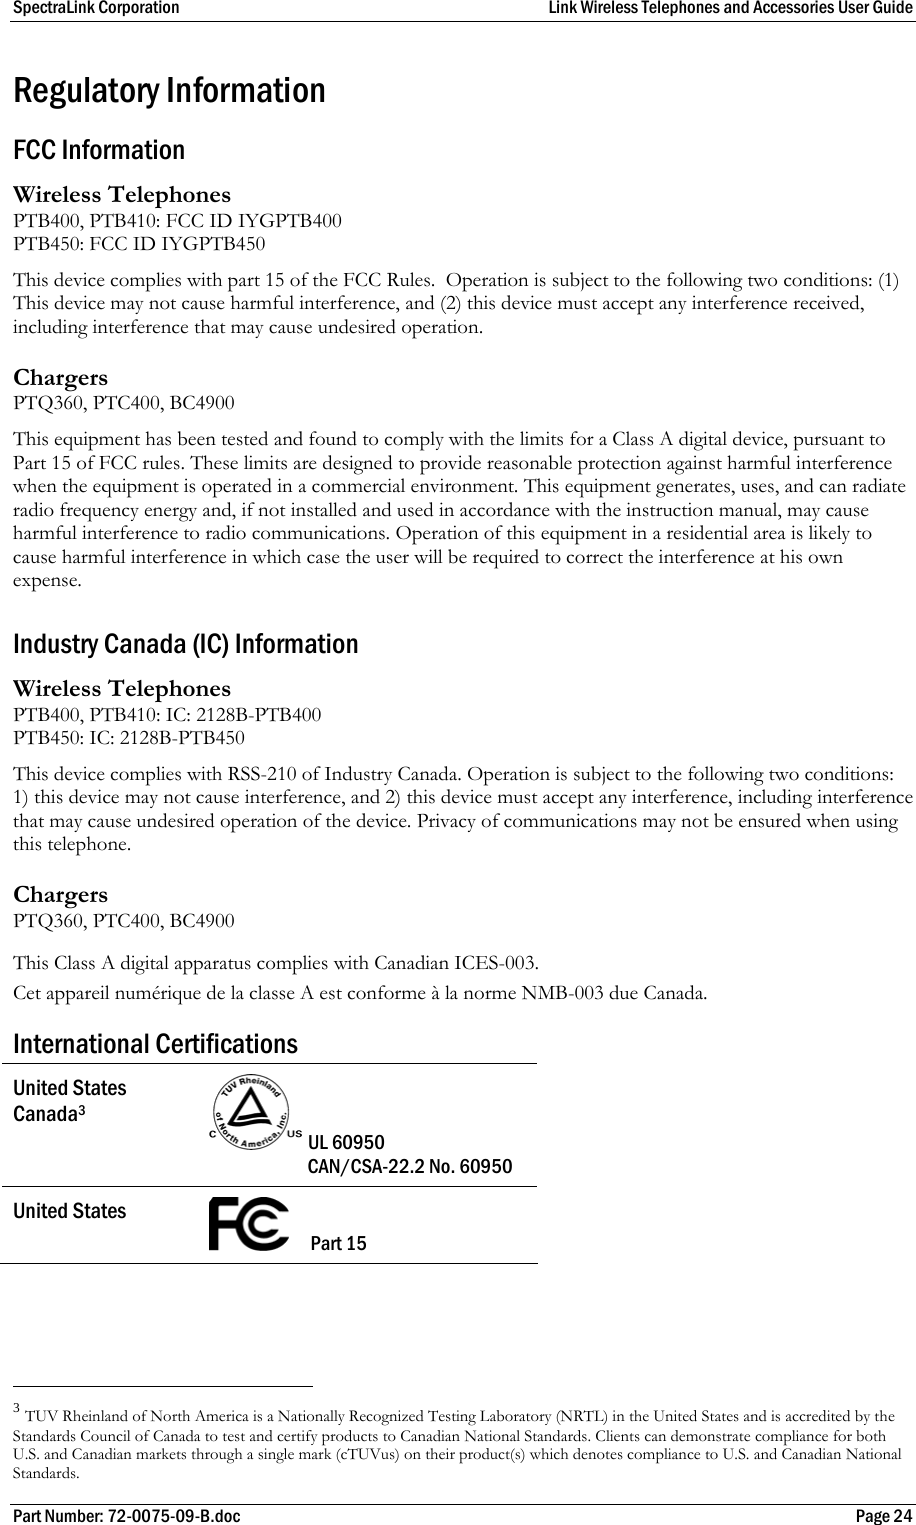 SpectraLink Corporation  Link Wireless Telephones and Accessories User Guide Part Number: 72-0075-09-B.doc  Page 24 Regulatory Information FCC Information Wireless Telephones PTB400, PTB410: FCC ID IYGPTB400 PTB450: FCC ID IYGPTB450 This device complies with part 15 of the FCC Rules.  Operation is subject to the following two conditions: (1) This device may not cause harmful interference, and (2) this device must accept any interference received, including interference that may cause undesired operation. Chargers PTQ360, PTC400, BC4900 This equipment has been tested and found to comply with the limits for a Class A digital device, pursuant to Part 15 of FCC rules. These limits are designed to provide reasonable protection against harmful interference when the equipment is operated in a commercial environment. This equipment generates, uses, and can radiate radio frequency energy and, if not installed and used in accordance with the instruction manual, may cause harmful interference to radio communications. Operation of this equipment in a residential area is likely to cause harmful interference in which case the user will be required to correct the interference at his own expense.  Industry Canada (IC) Information Wireless Telephones PTB400, PTB410: IC: 2128B-PTB400 PTB450: IC: 2128B-PTB450 This device complies with RSS-210 of Industry Canada. Operation is subject to the following two conditions: 1) this device may not cause interference, and 2) this device must accept any interference, including interference that may cause undesired operation of the device. Privacy of communications may not be ensured when using this telephone. Chargers PTQ360, PTC400, BC4900 This Class A digital apparatus complies with Canadian ICES-003. Cet appareil numérique de la classe A est conforme à la norme NMB-003 due Canada. International Certifications United States Canada3   UL 60950  CAN/CSA-22.2 No. 60950 United States       Part 15                                                       3 TUV Rheinland of North America is a Nationally Recognized Testing Laboratory (NRTL) in the United States and is accredited by the Standards Council of Canada to test and certify products to Canadian National Standards. Clients can demonstrate compliance for both U.S. and Canadian markets through a single mark (cTUVus) on their product(s) which denotes compliance to U.S. and Canadian National Standards. 